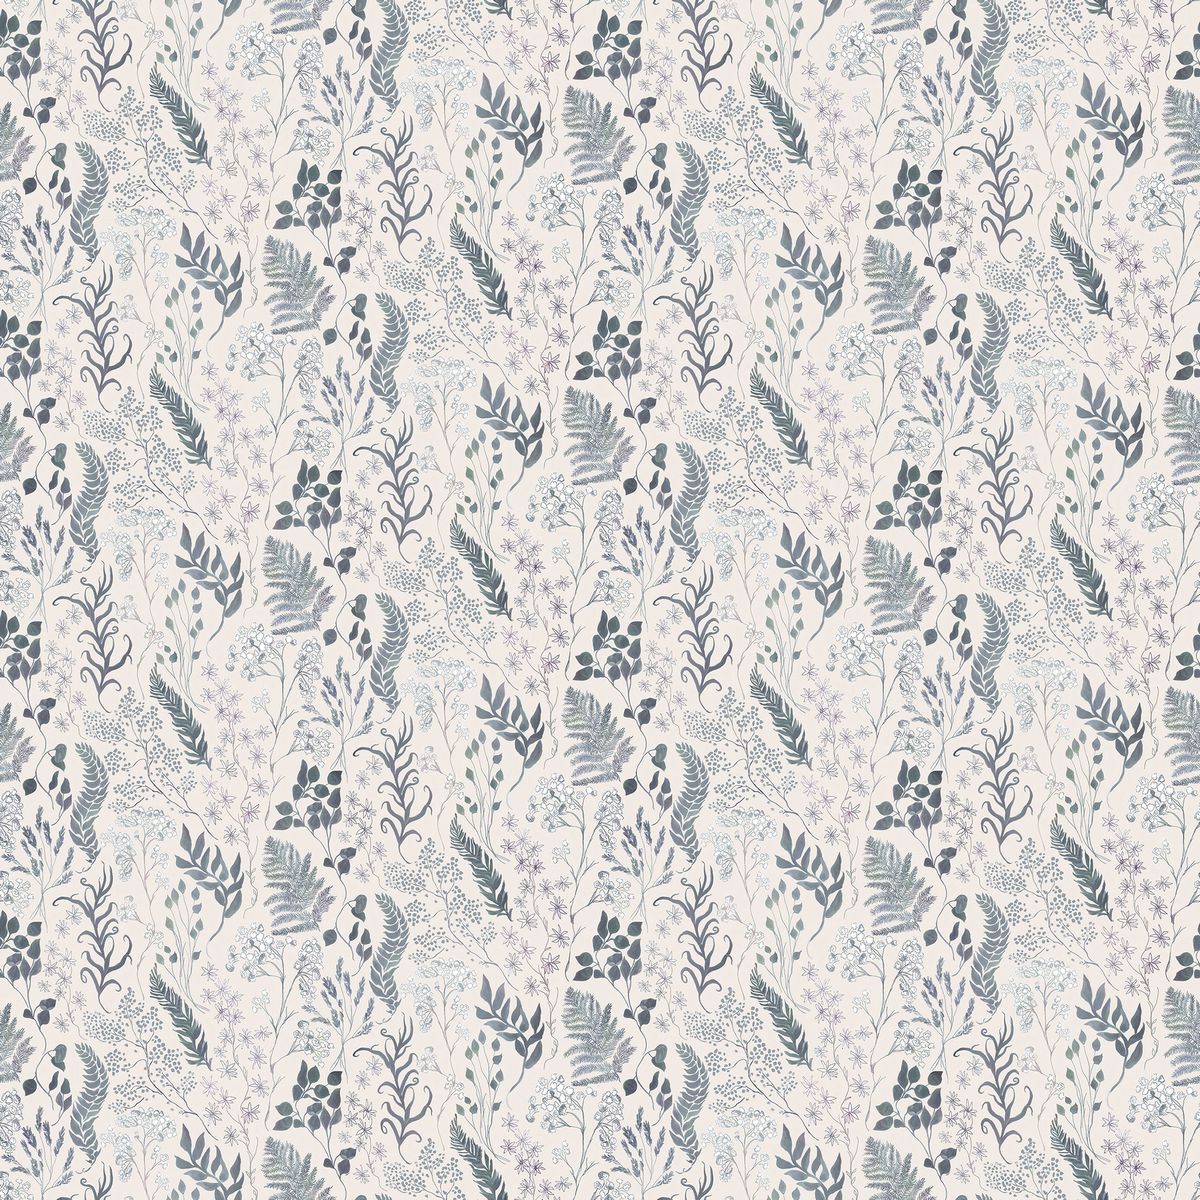 Aileana Willow Fabric by Voyage Maison